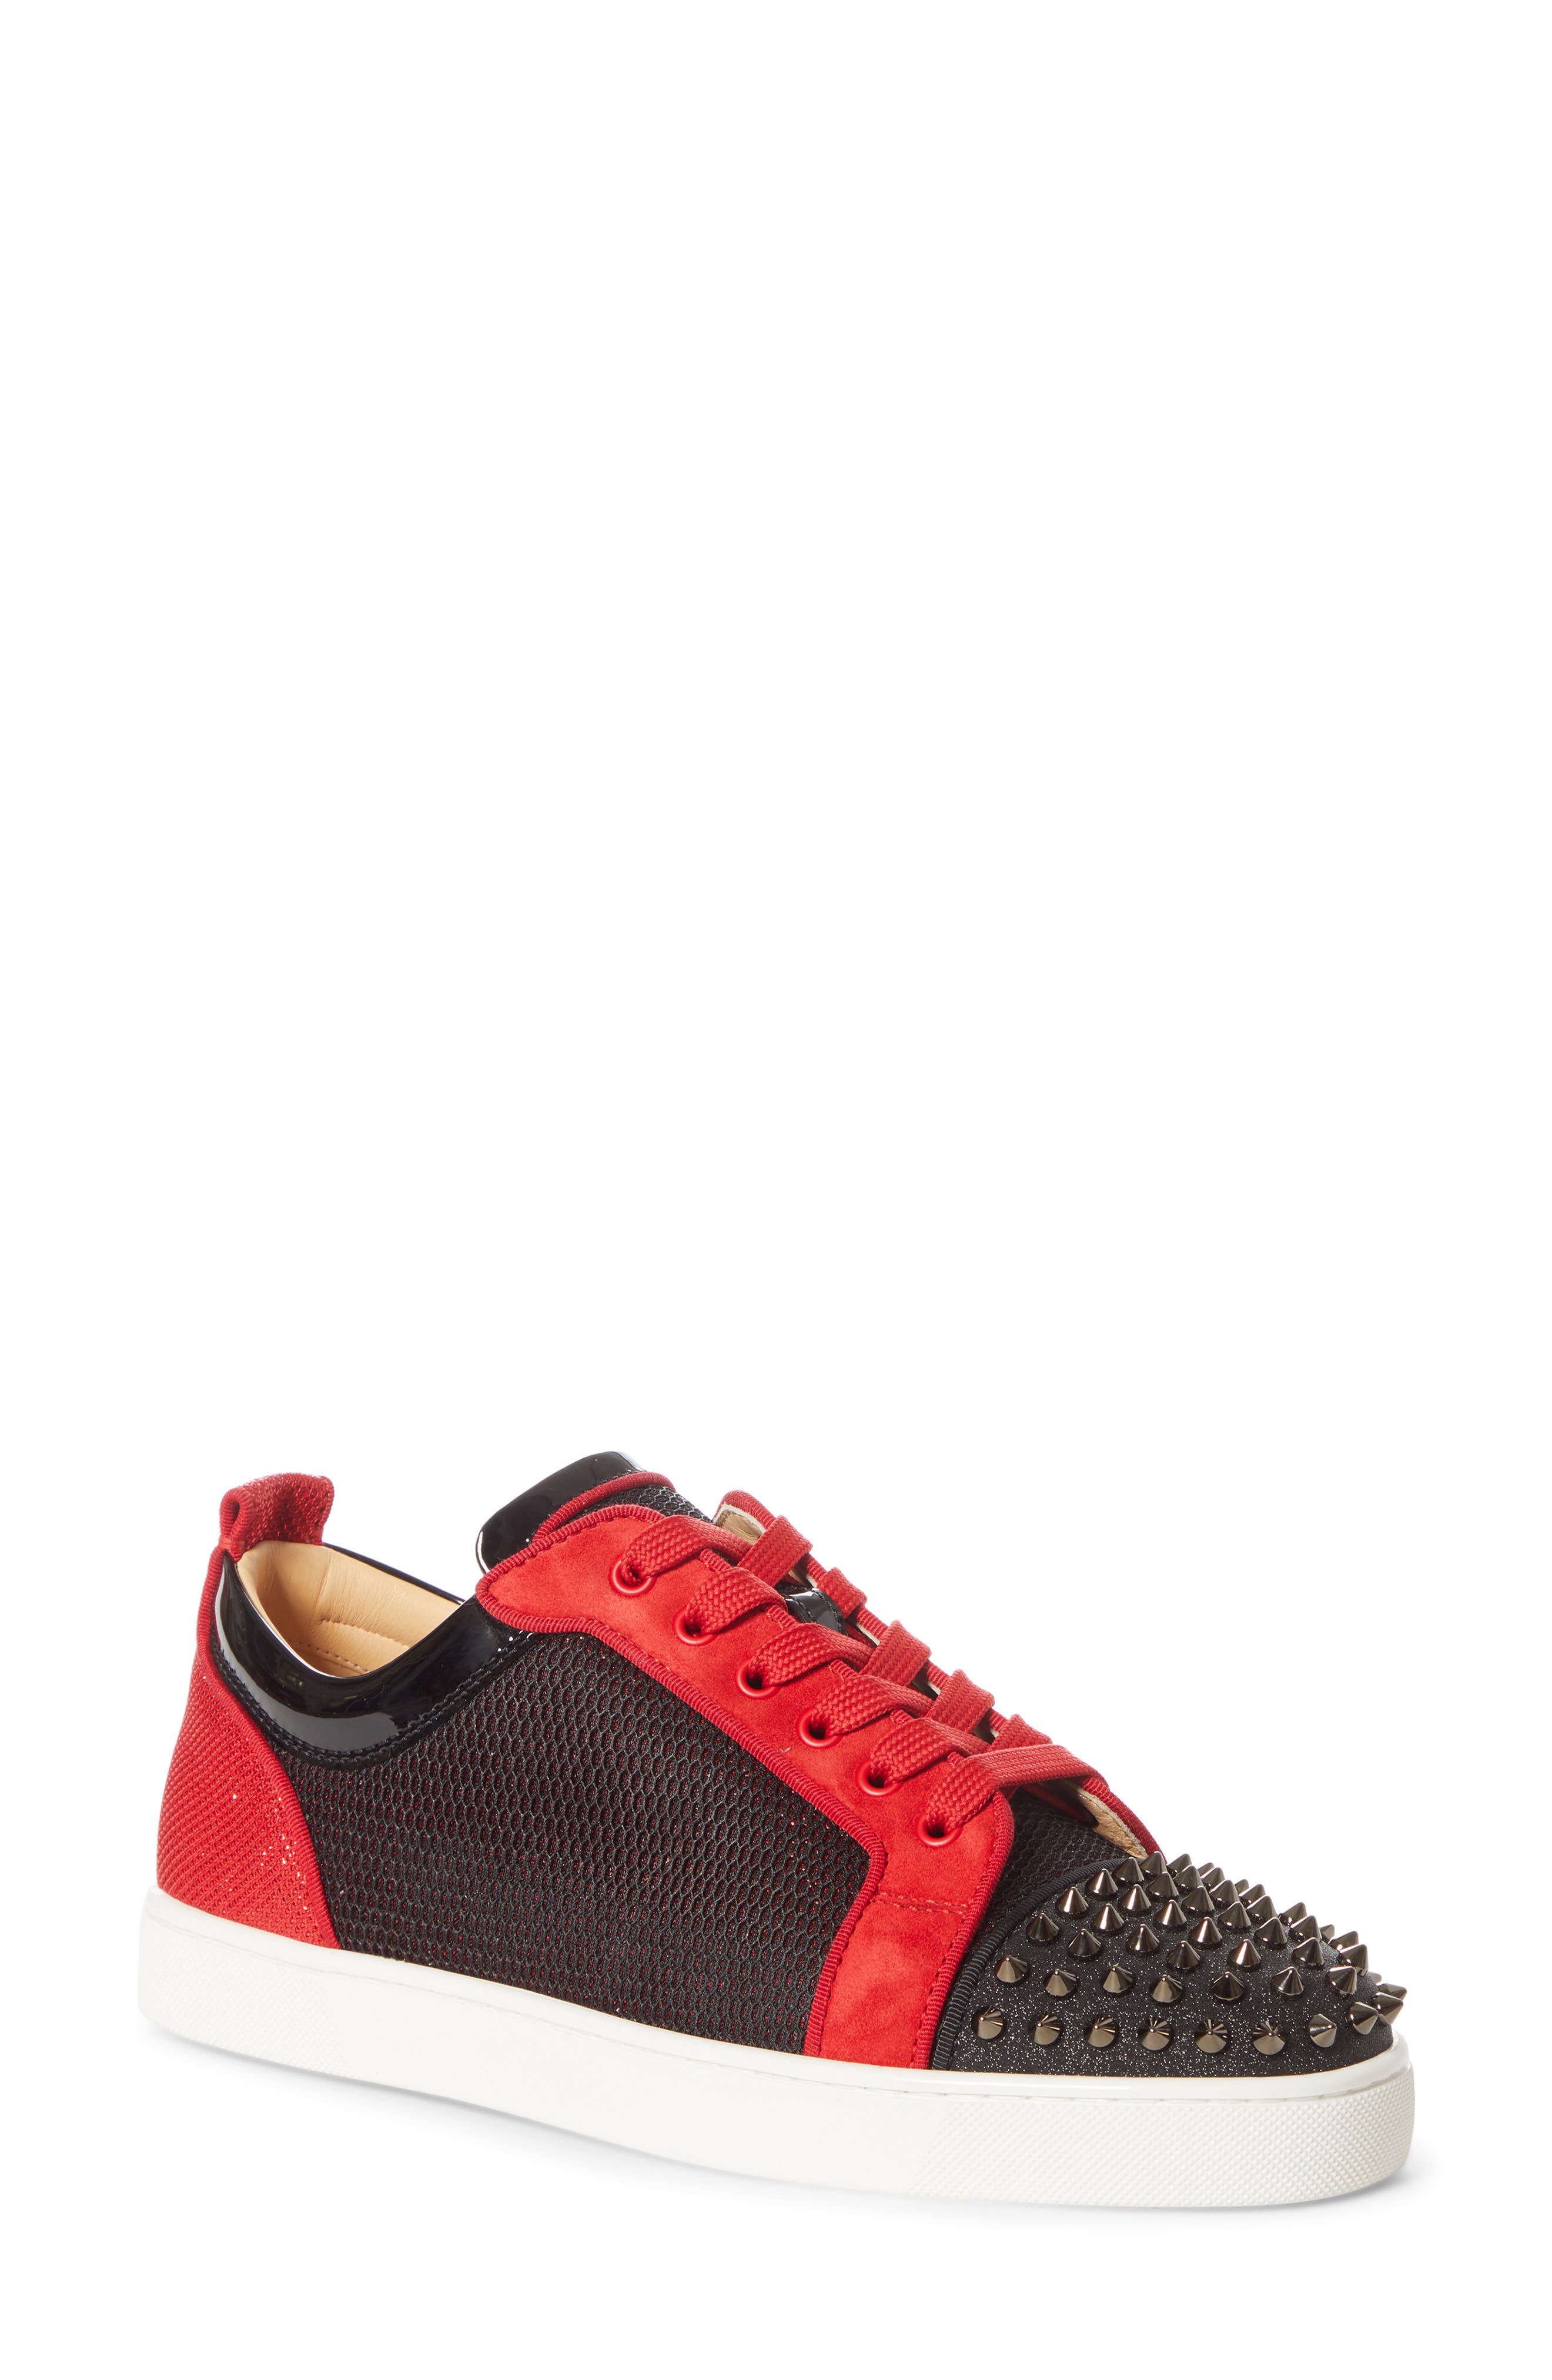 red louboutins mens